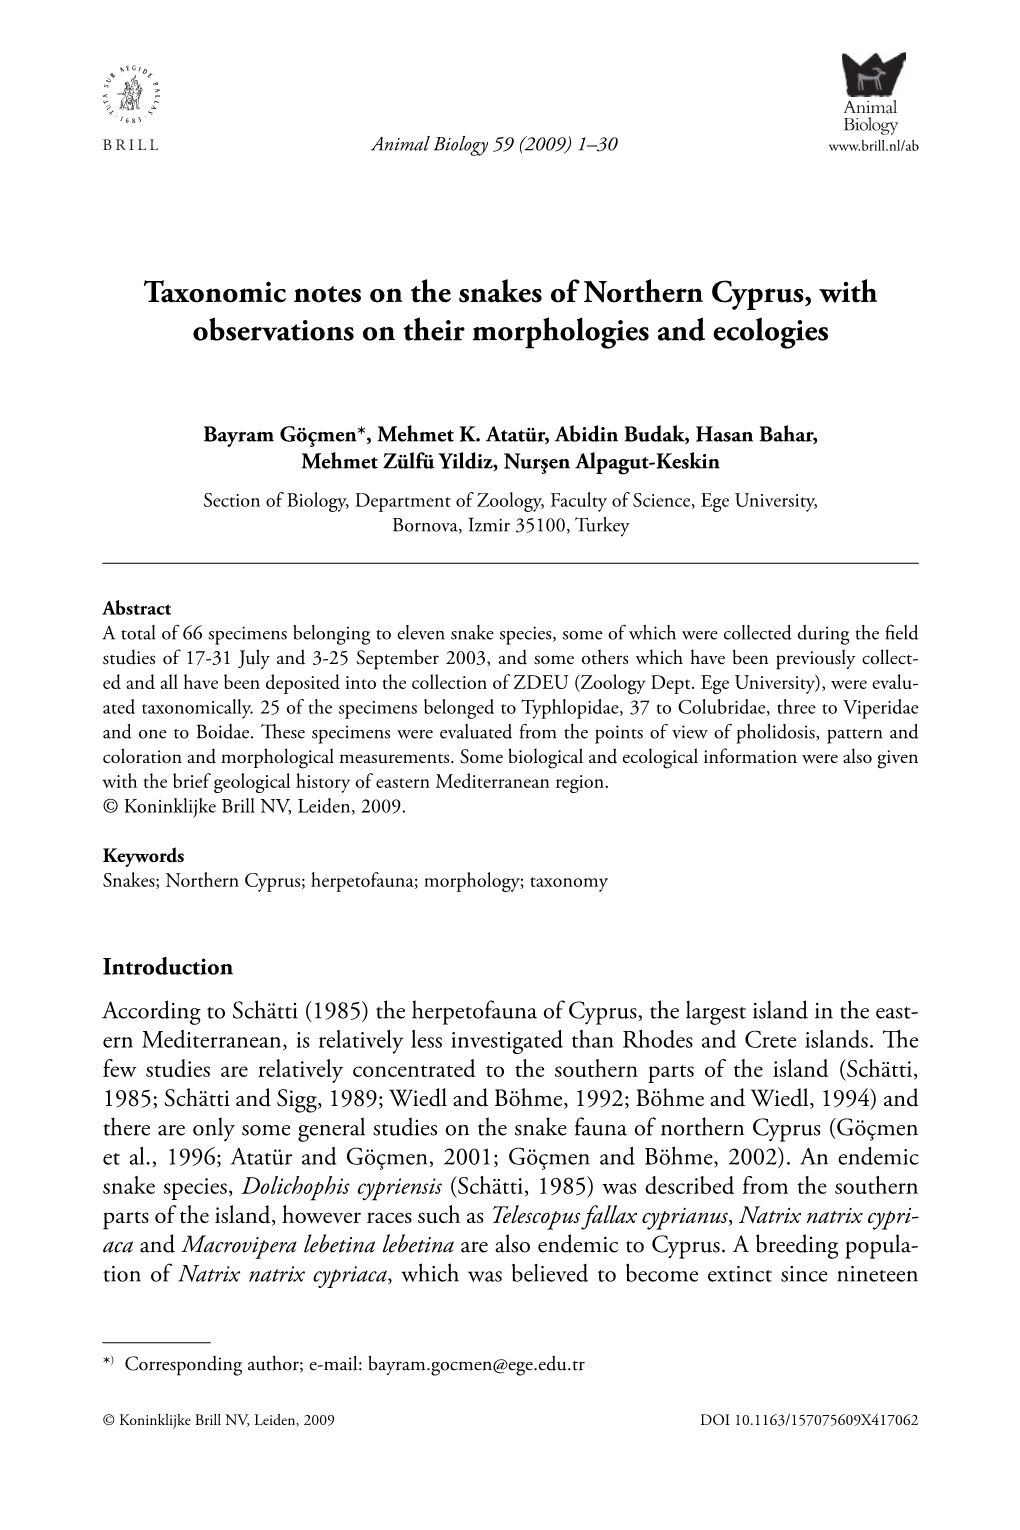 Taxonomic Notes on the Snakes of Northern Cyprus, with Observations on Their Morphologies and Ecologies